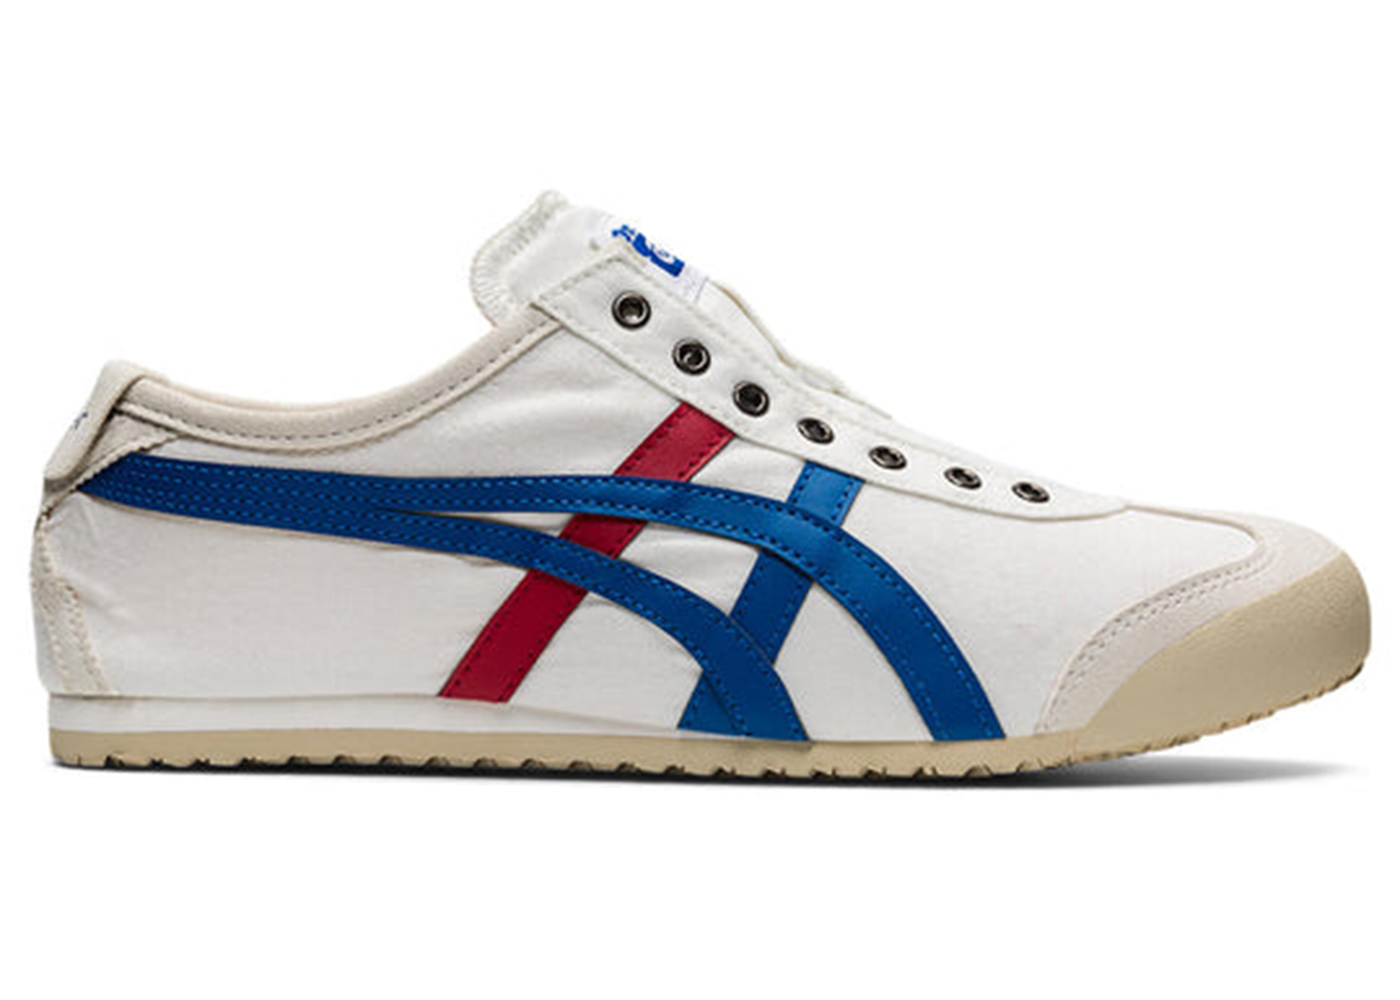 Onitsuka Tiger Mexico 66 Slip-On White Blue Red